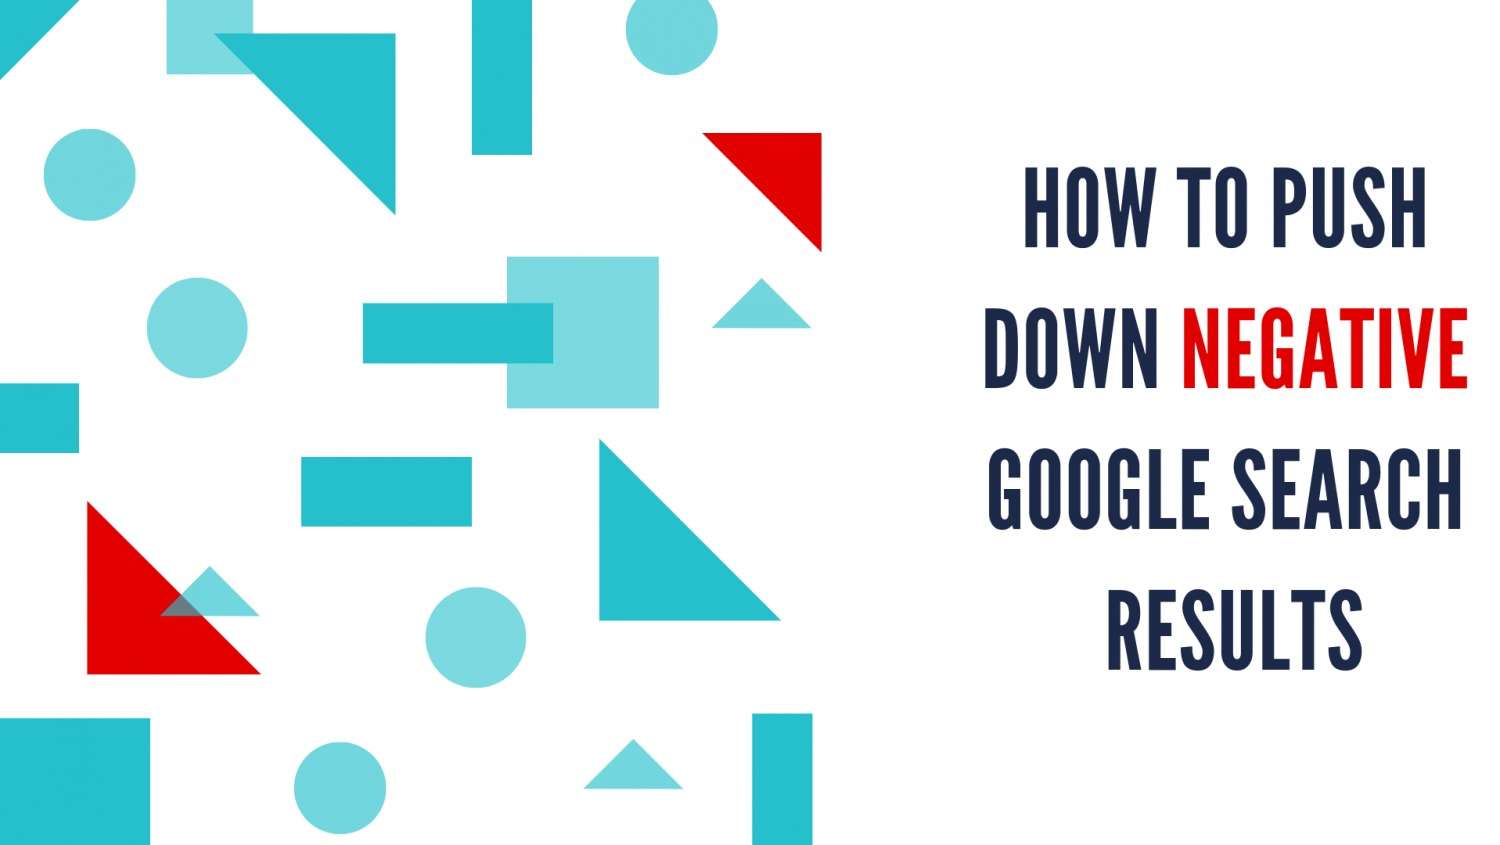 How to push down negative google search results